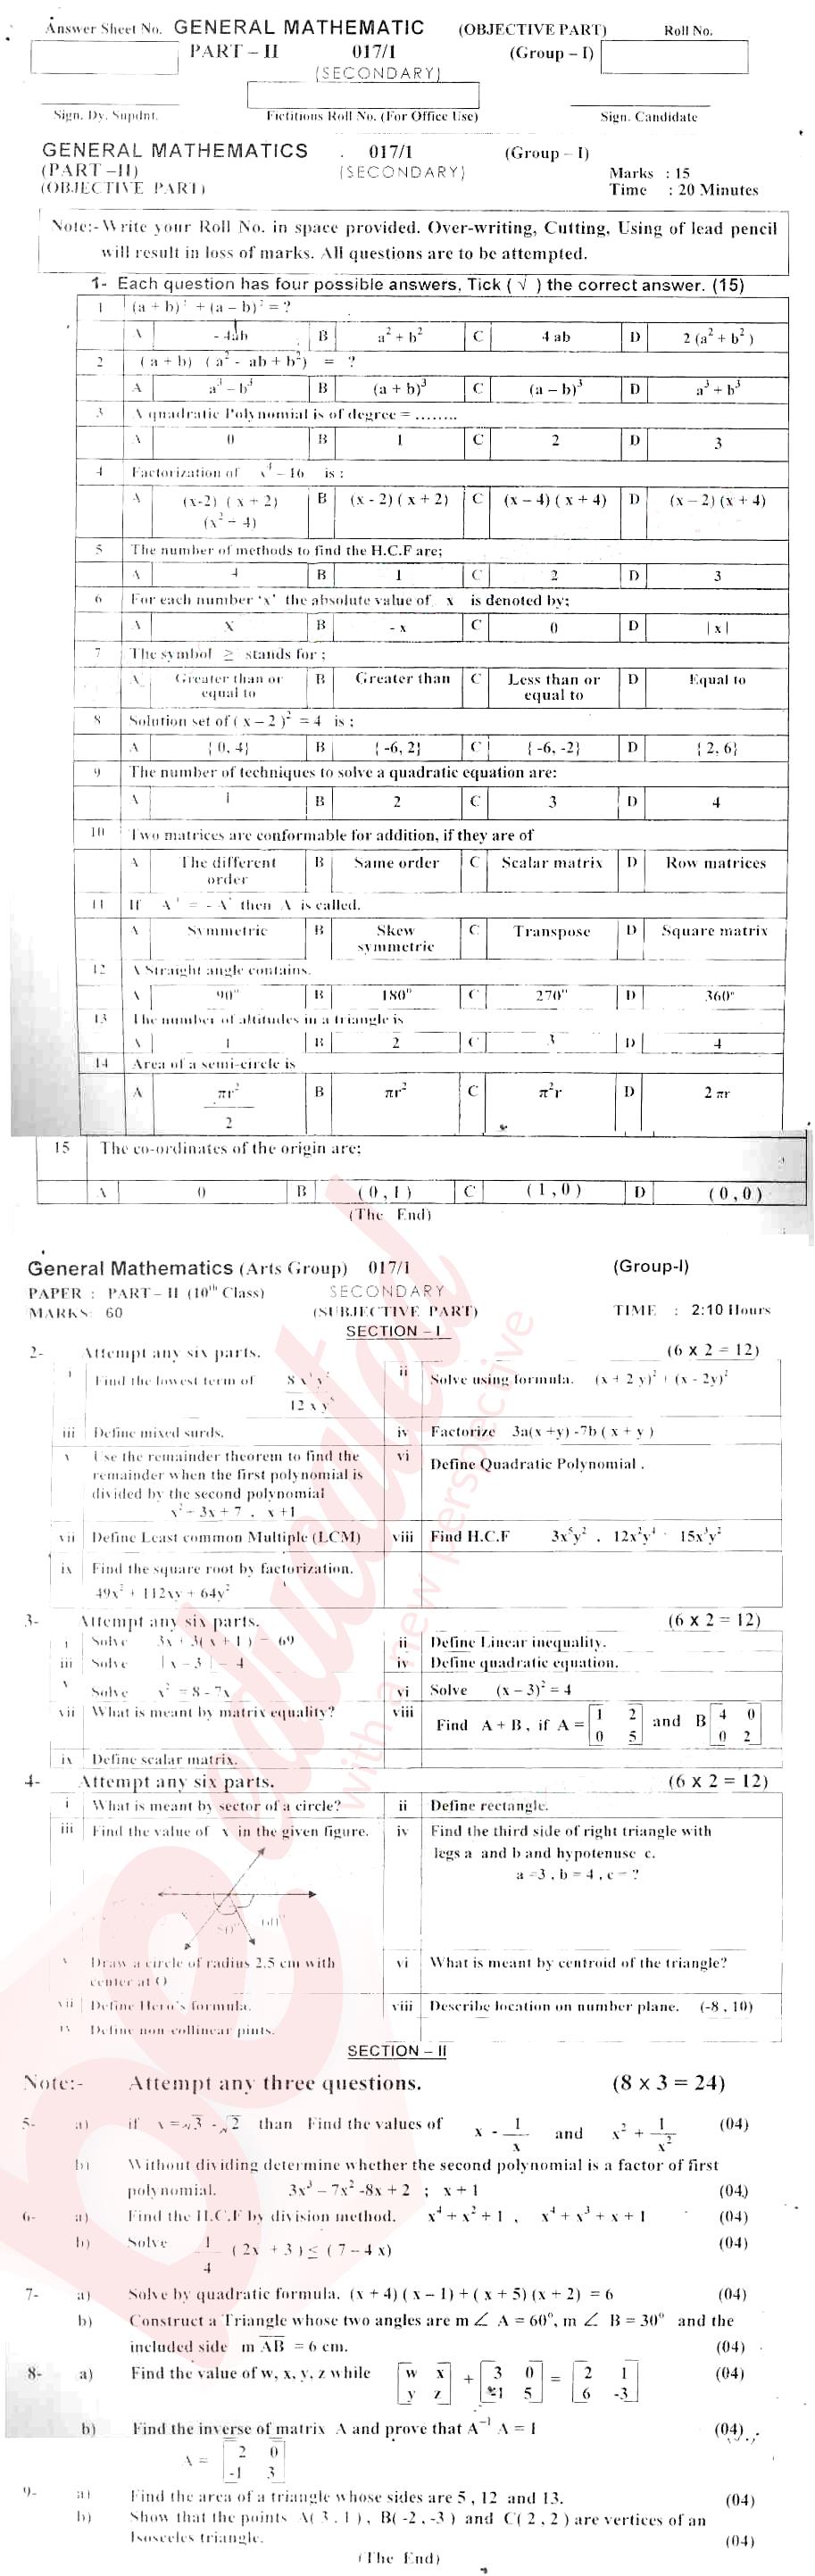 General Math 10th class Past Paper Group 1 BISE AJK 2017